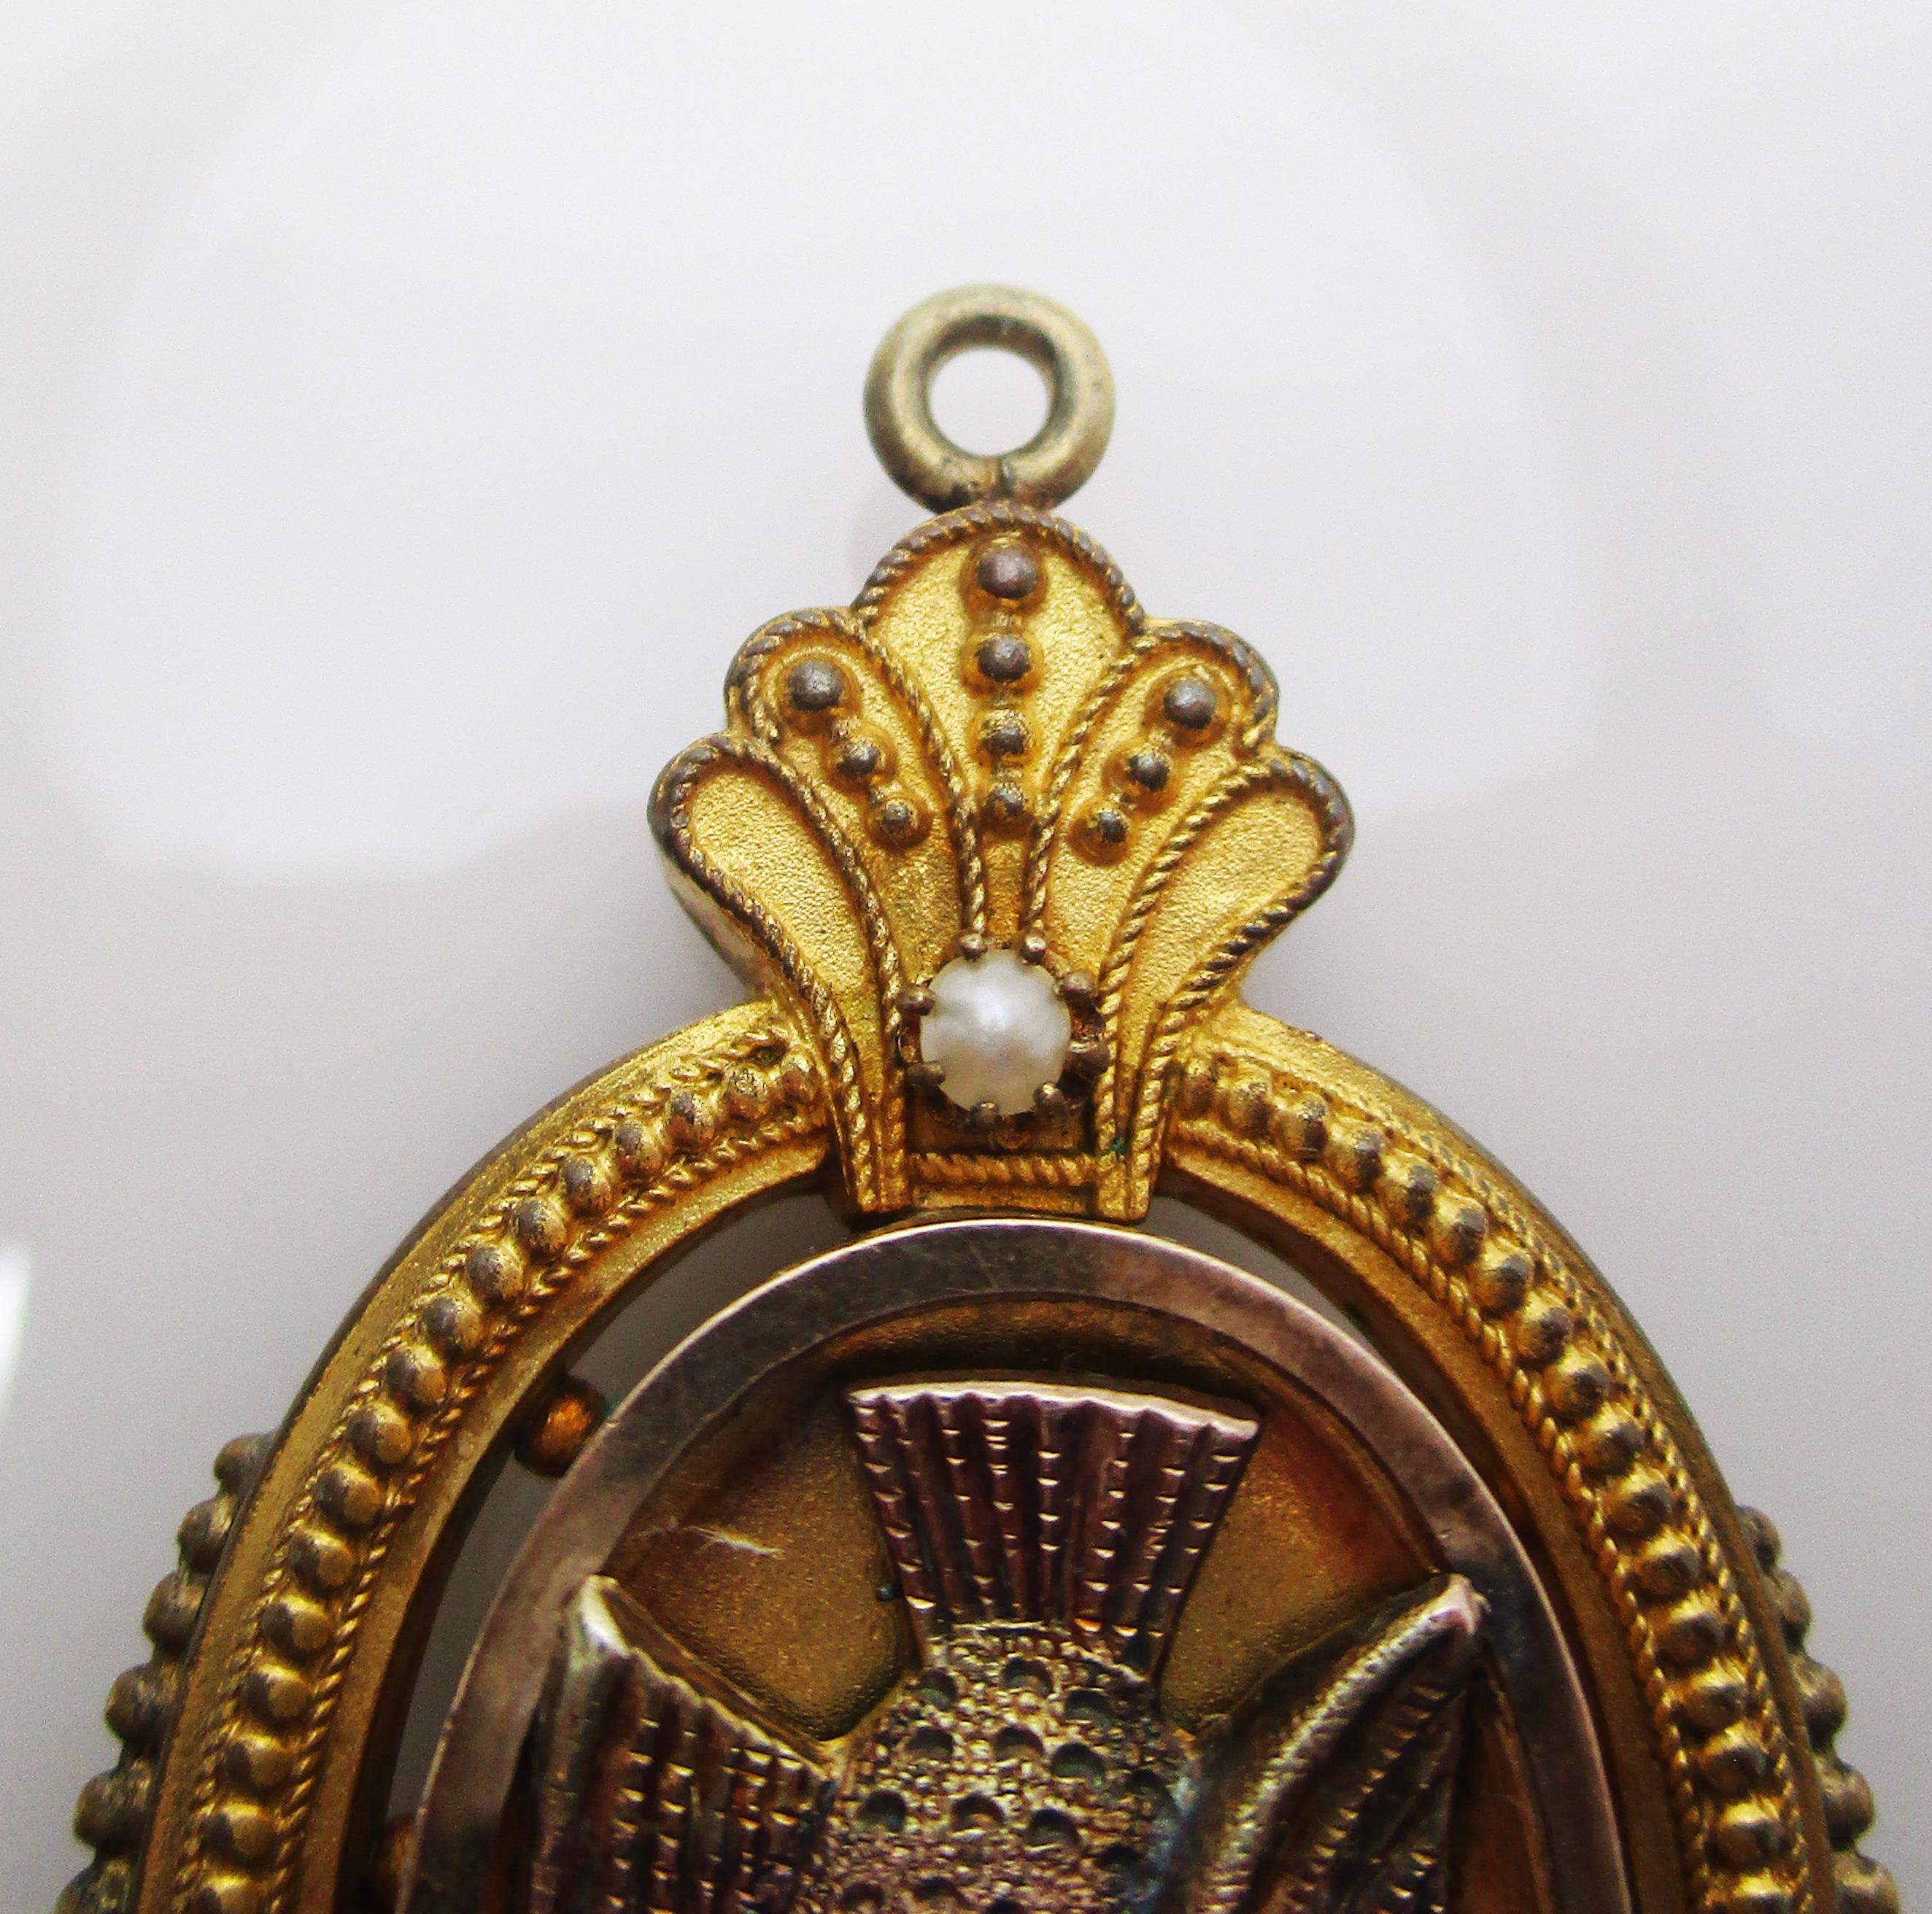 This is a gorgeous Victorian locket in bright yellow gold filled with a unique dove design and beautiful seed pearl accents! This locket has a bold layout with an excellent degree of depth. The center features an elegant dove detailed with a fine